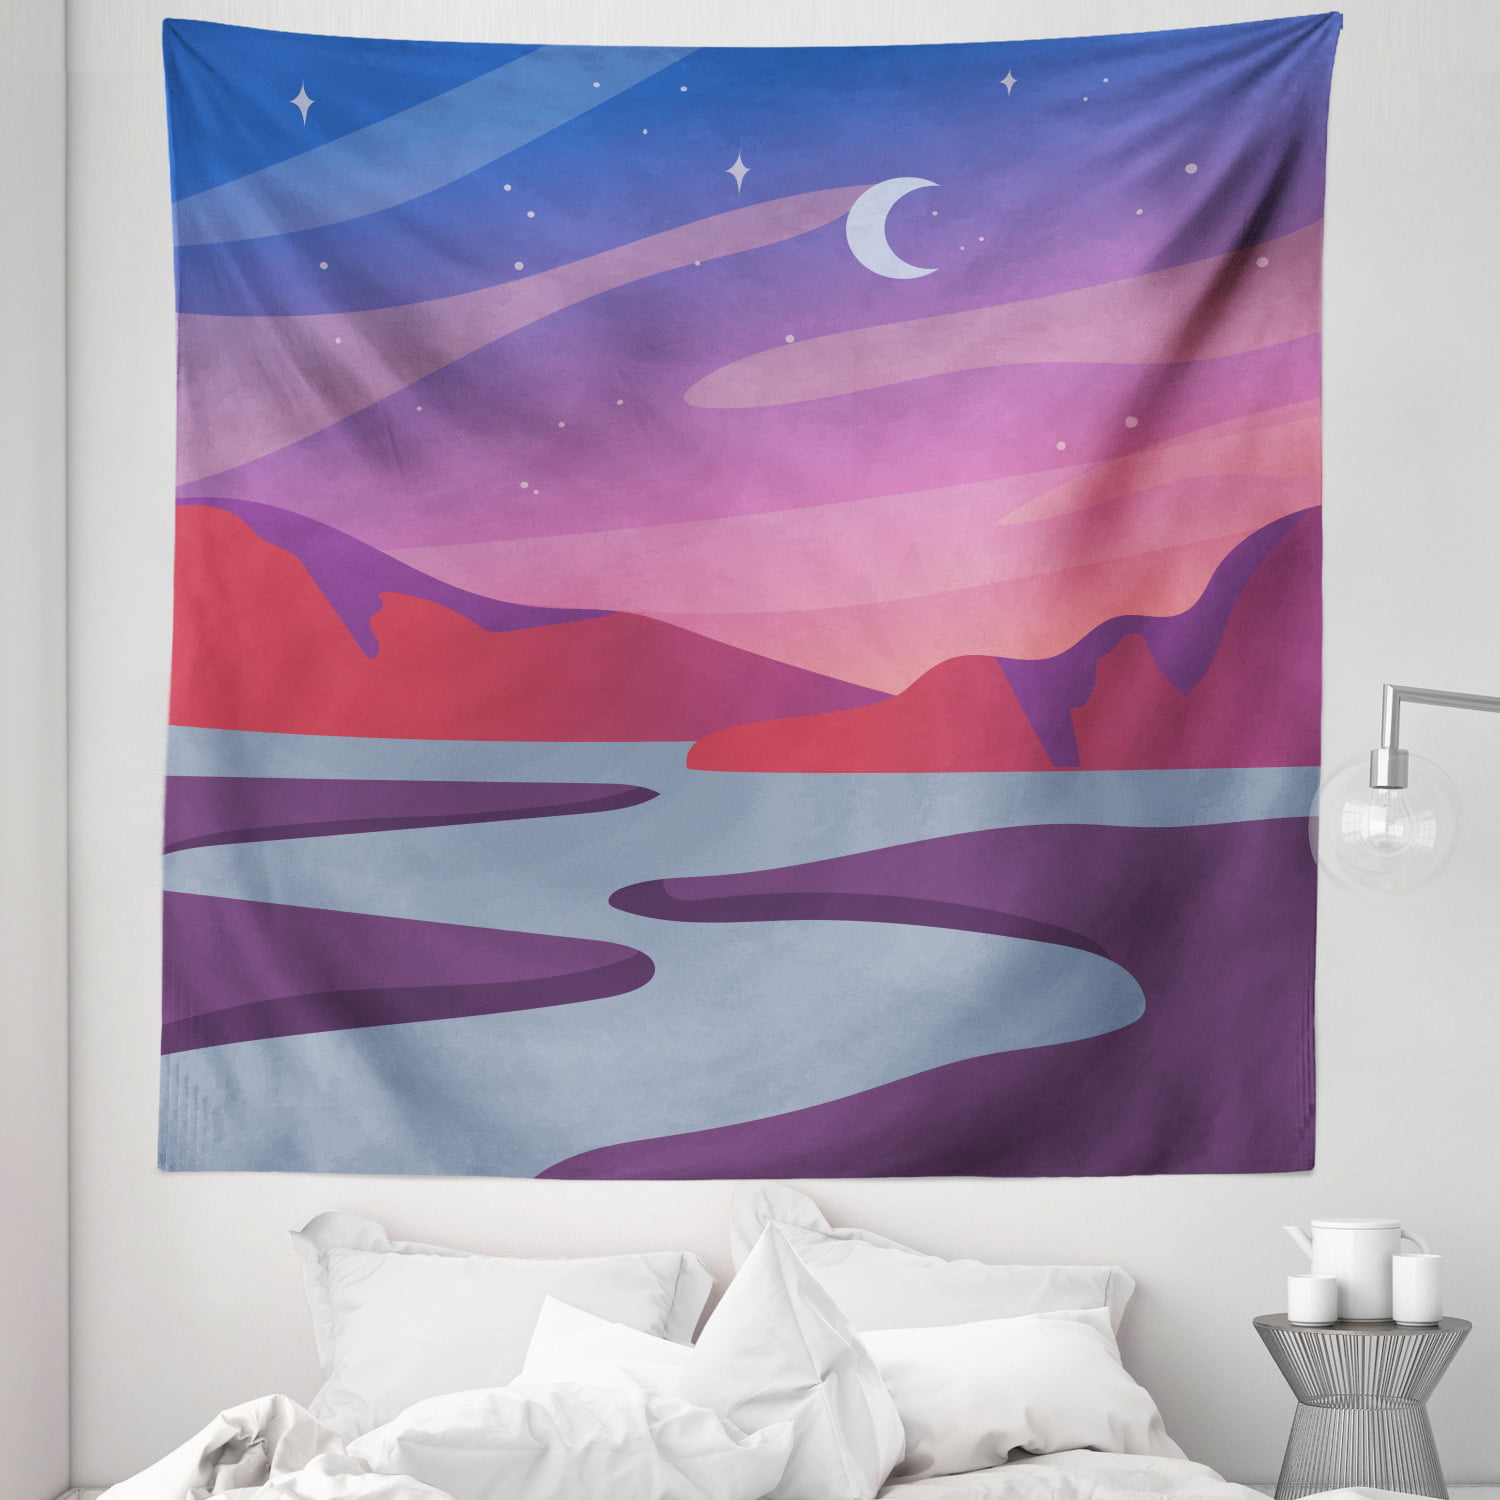 Hazy Sky Sun Tapestry Abstract Mountain Tapestry Pink Land Tapestry Wall Hanging River Tapestry For Bedroom Living Room Dorm Home Deco